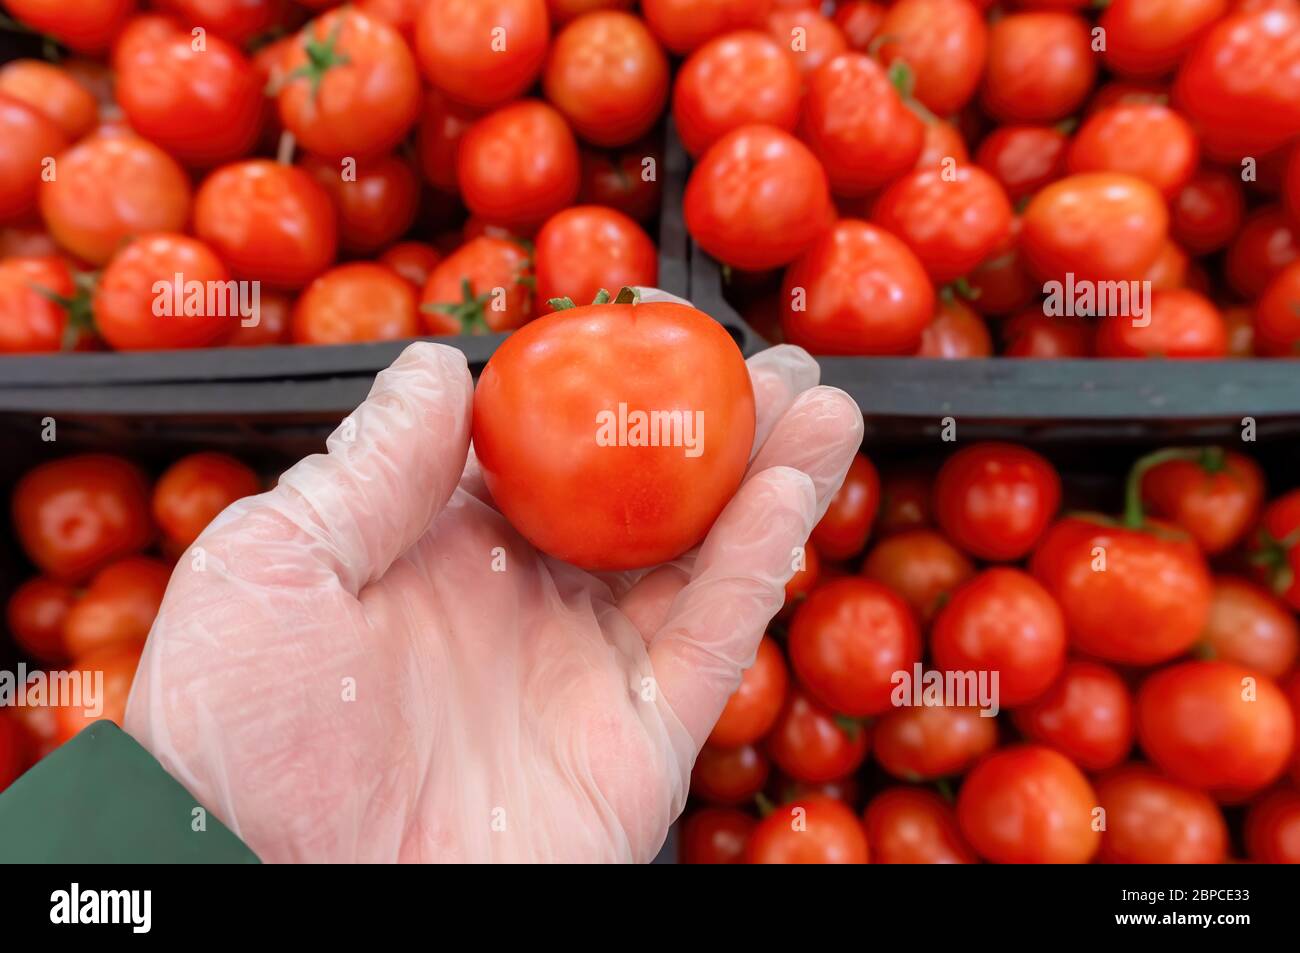 while shopping at market buyer holding red tomato in the store in protective gloves because of hygienic safety and protection against coronavirus or o Stock Photo